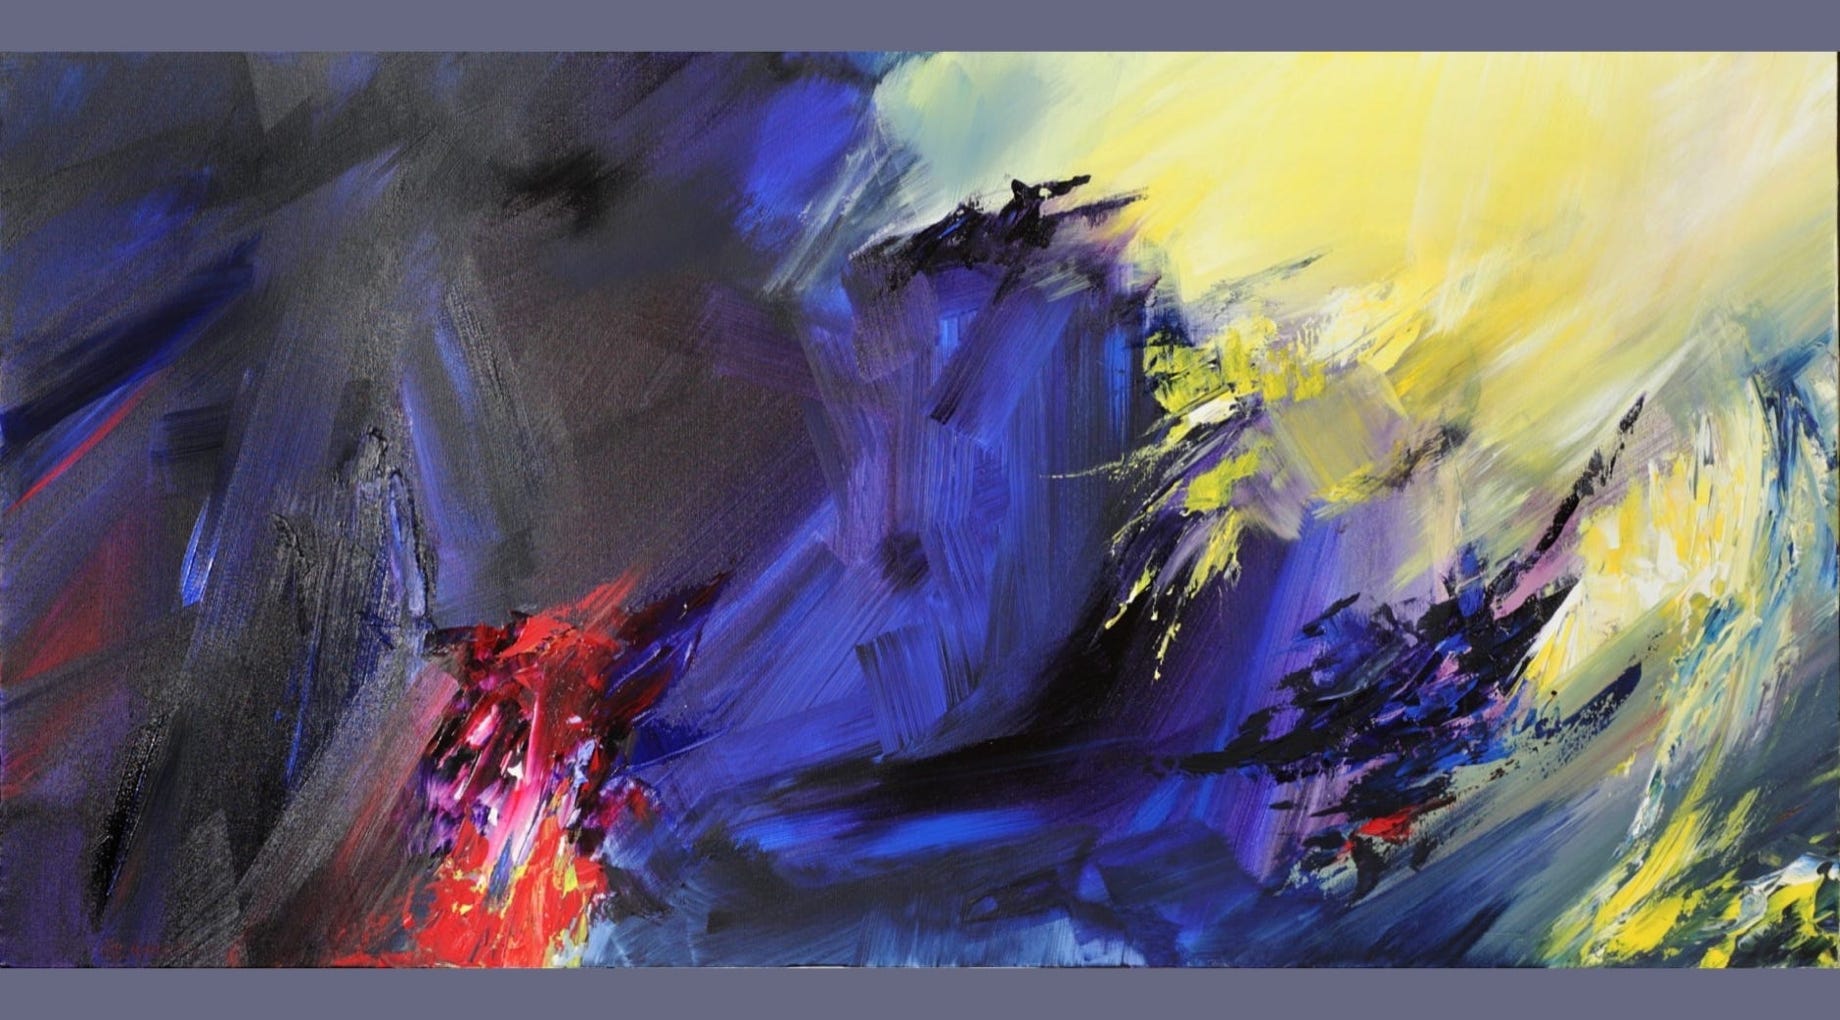 Bold color and movement abound in this dynamic piece